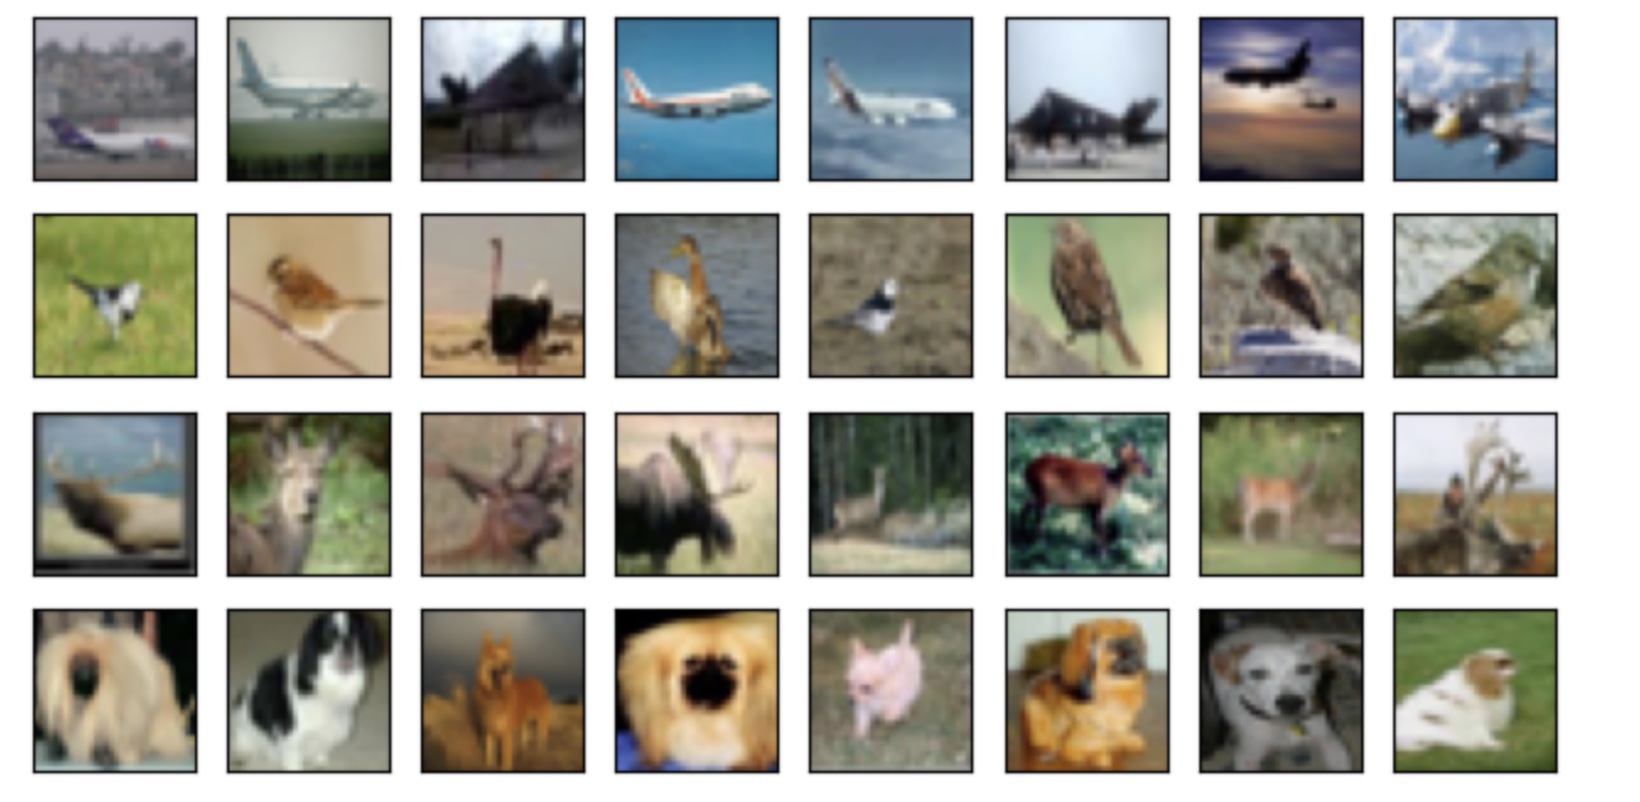 Visualization of an image dataset that is collected sequentially by class.